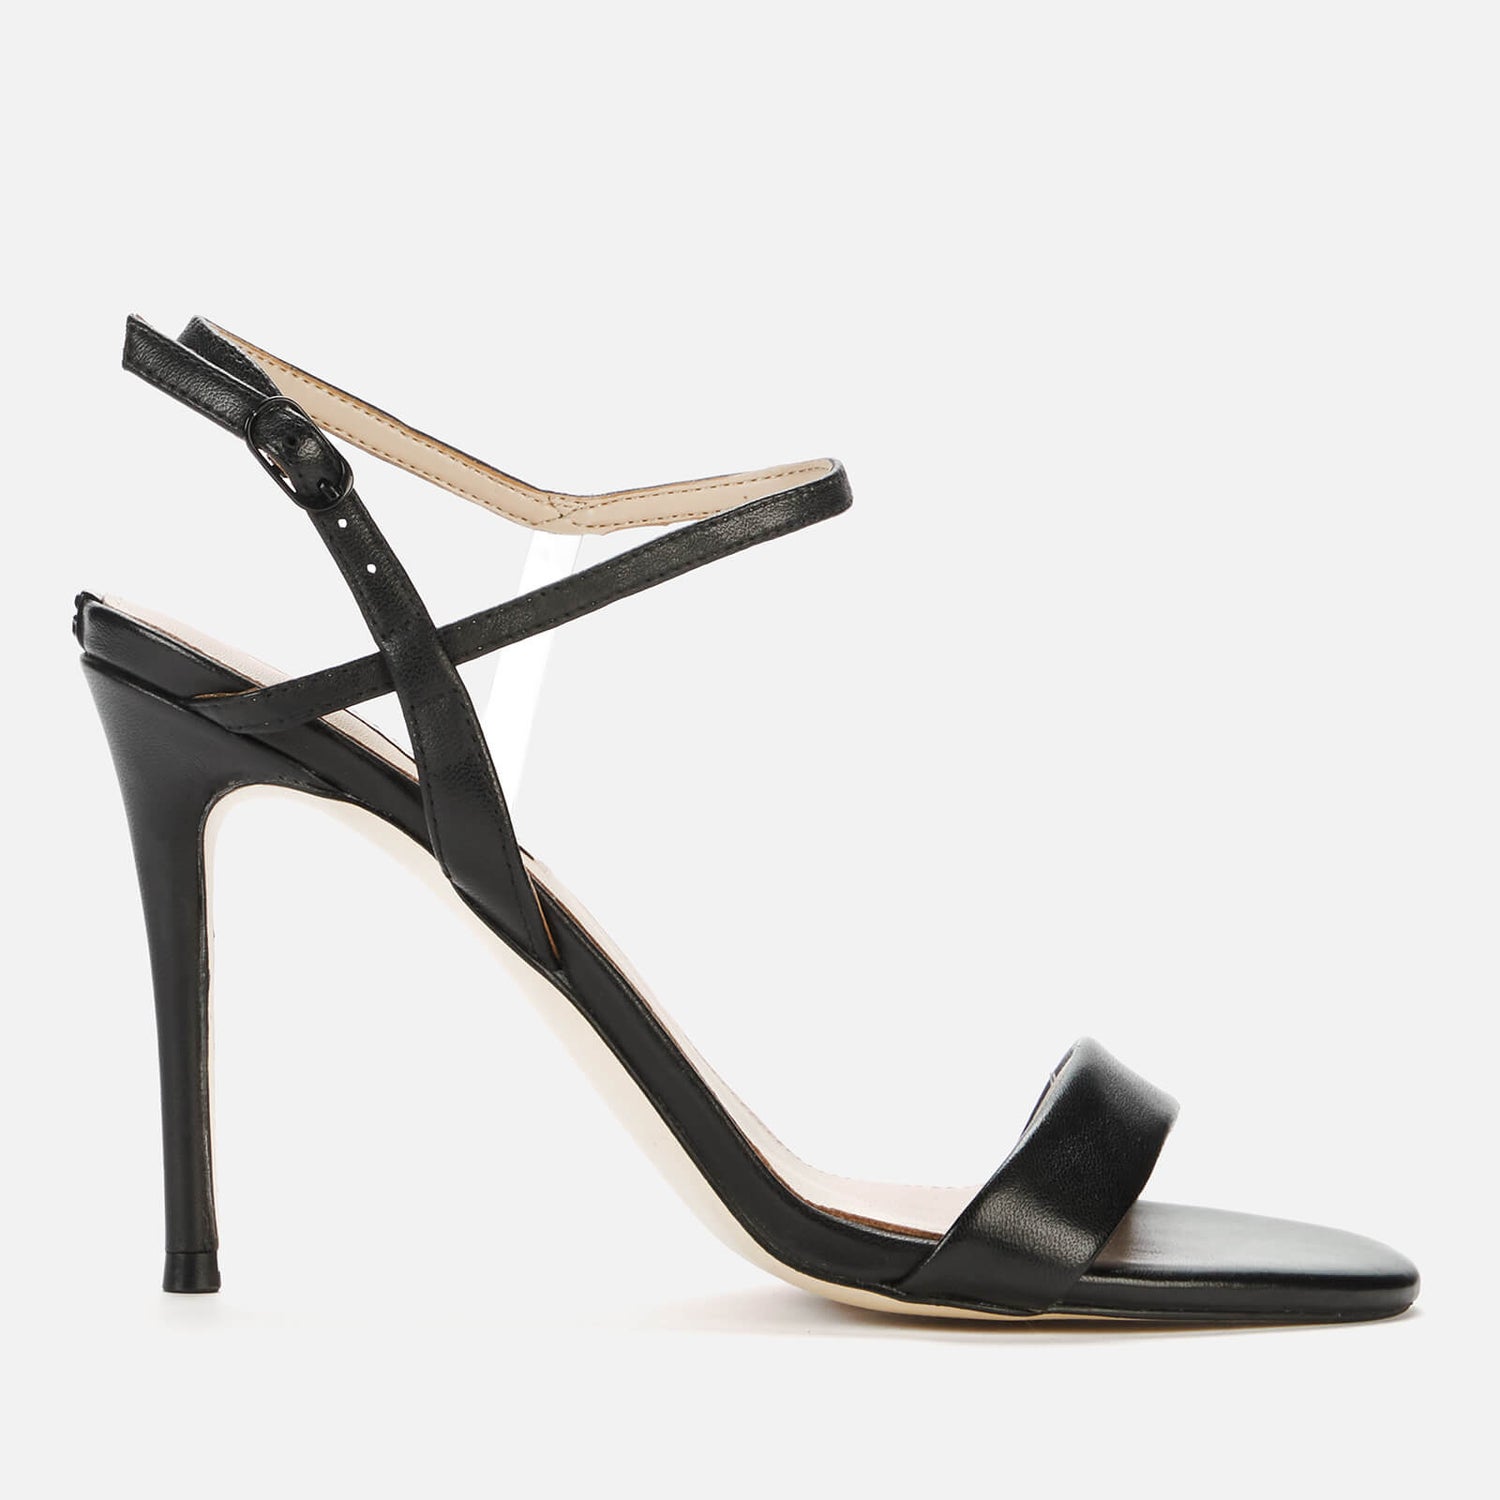 Guess Women's Kabelle Leather Heeled Sandals - Black - UK 3